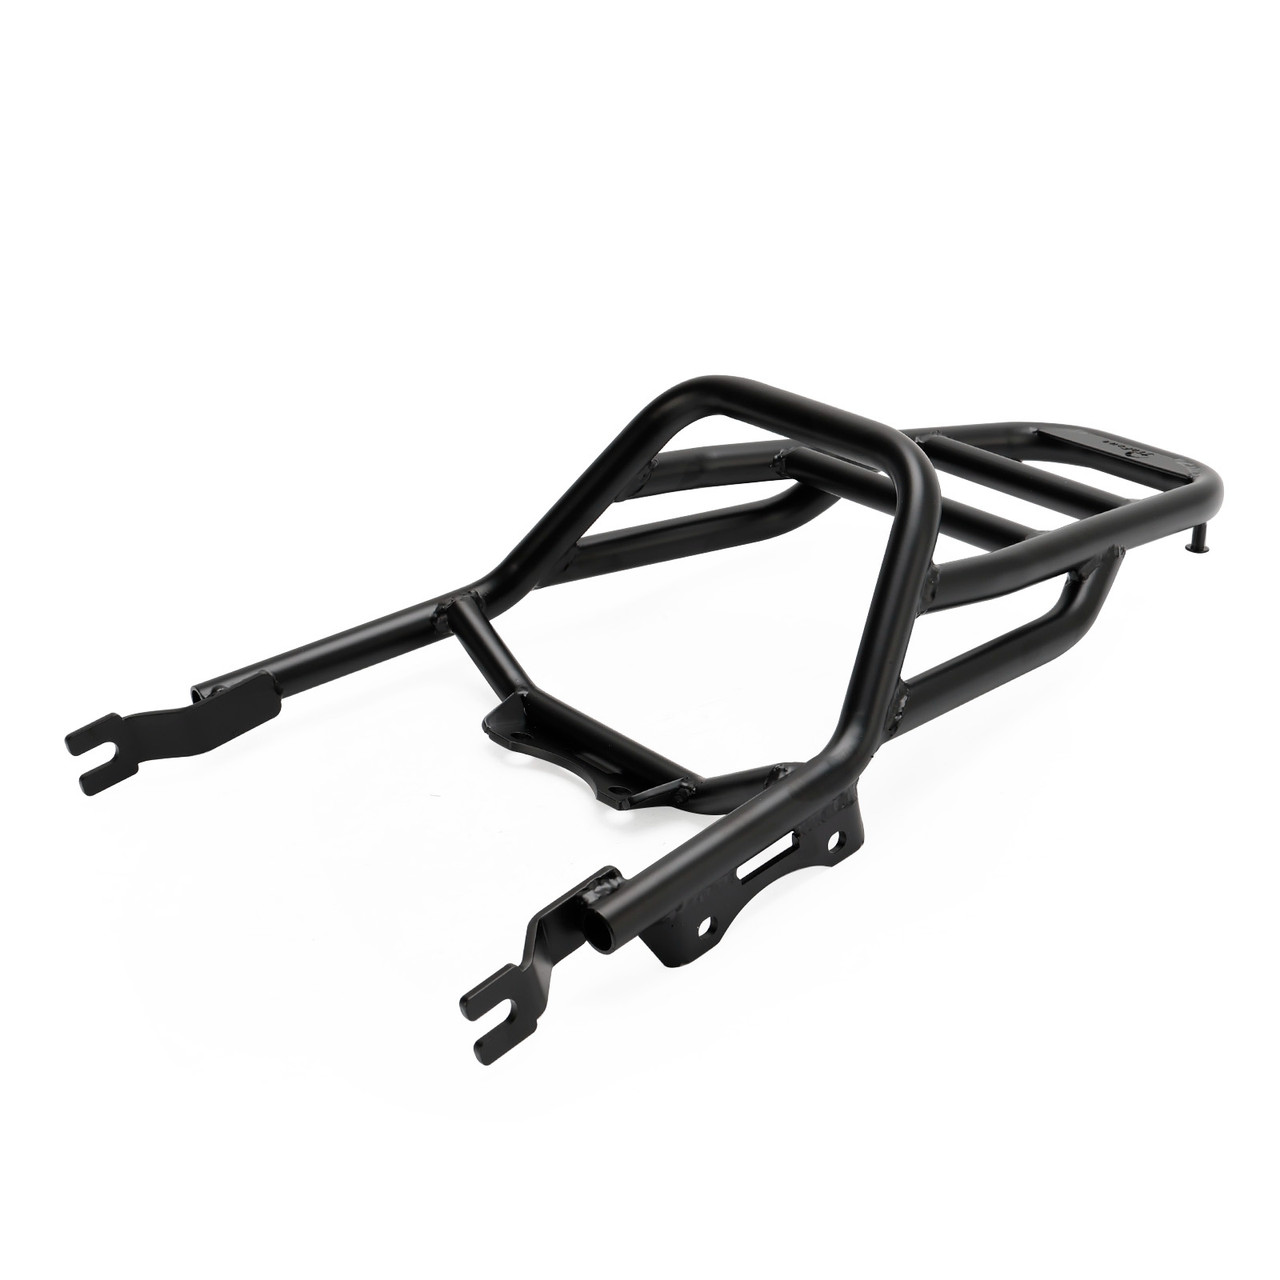 Rear Luggage Rack Black Carrier Support For Honda ST125 Dax 2022 2023